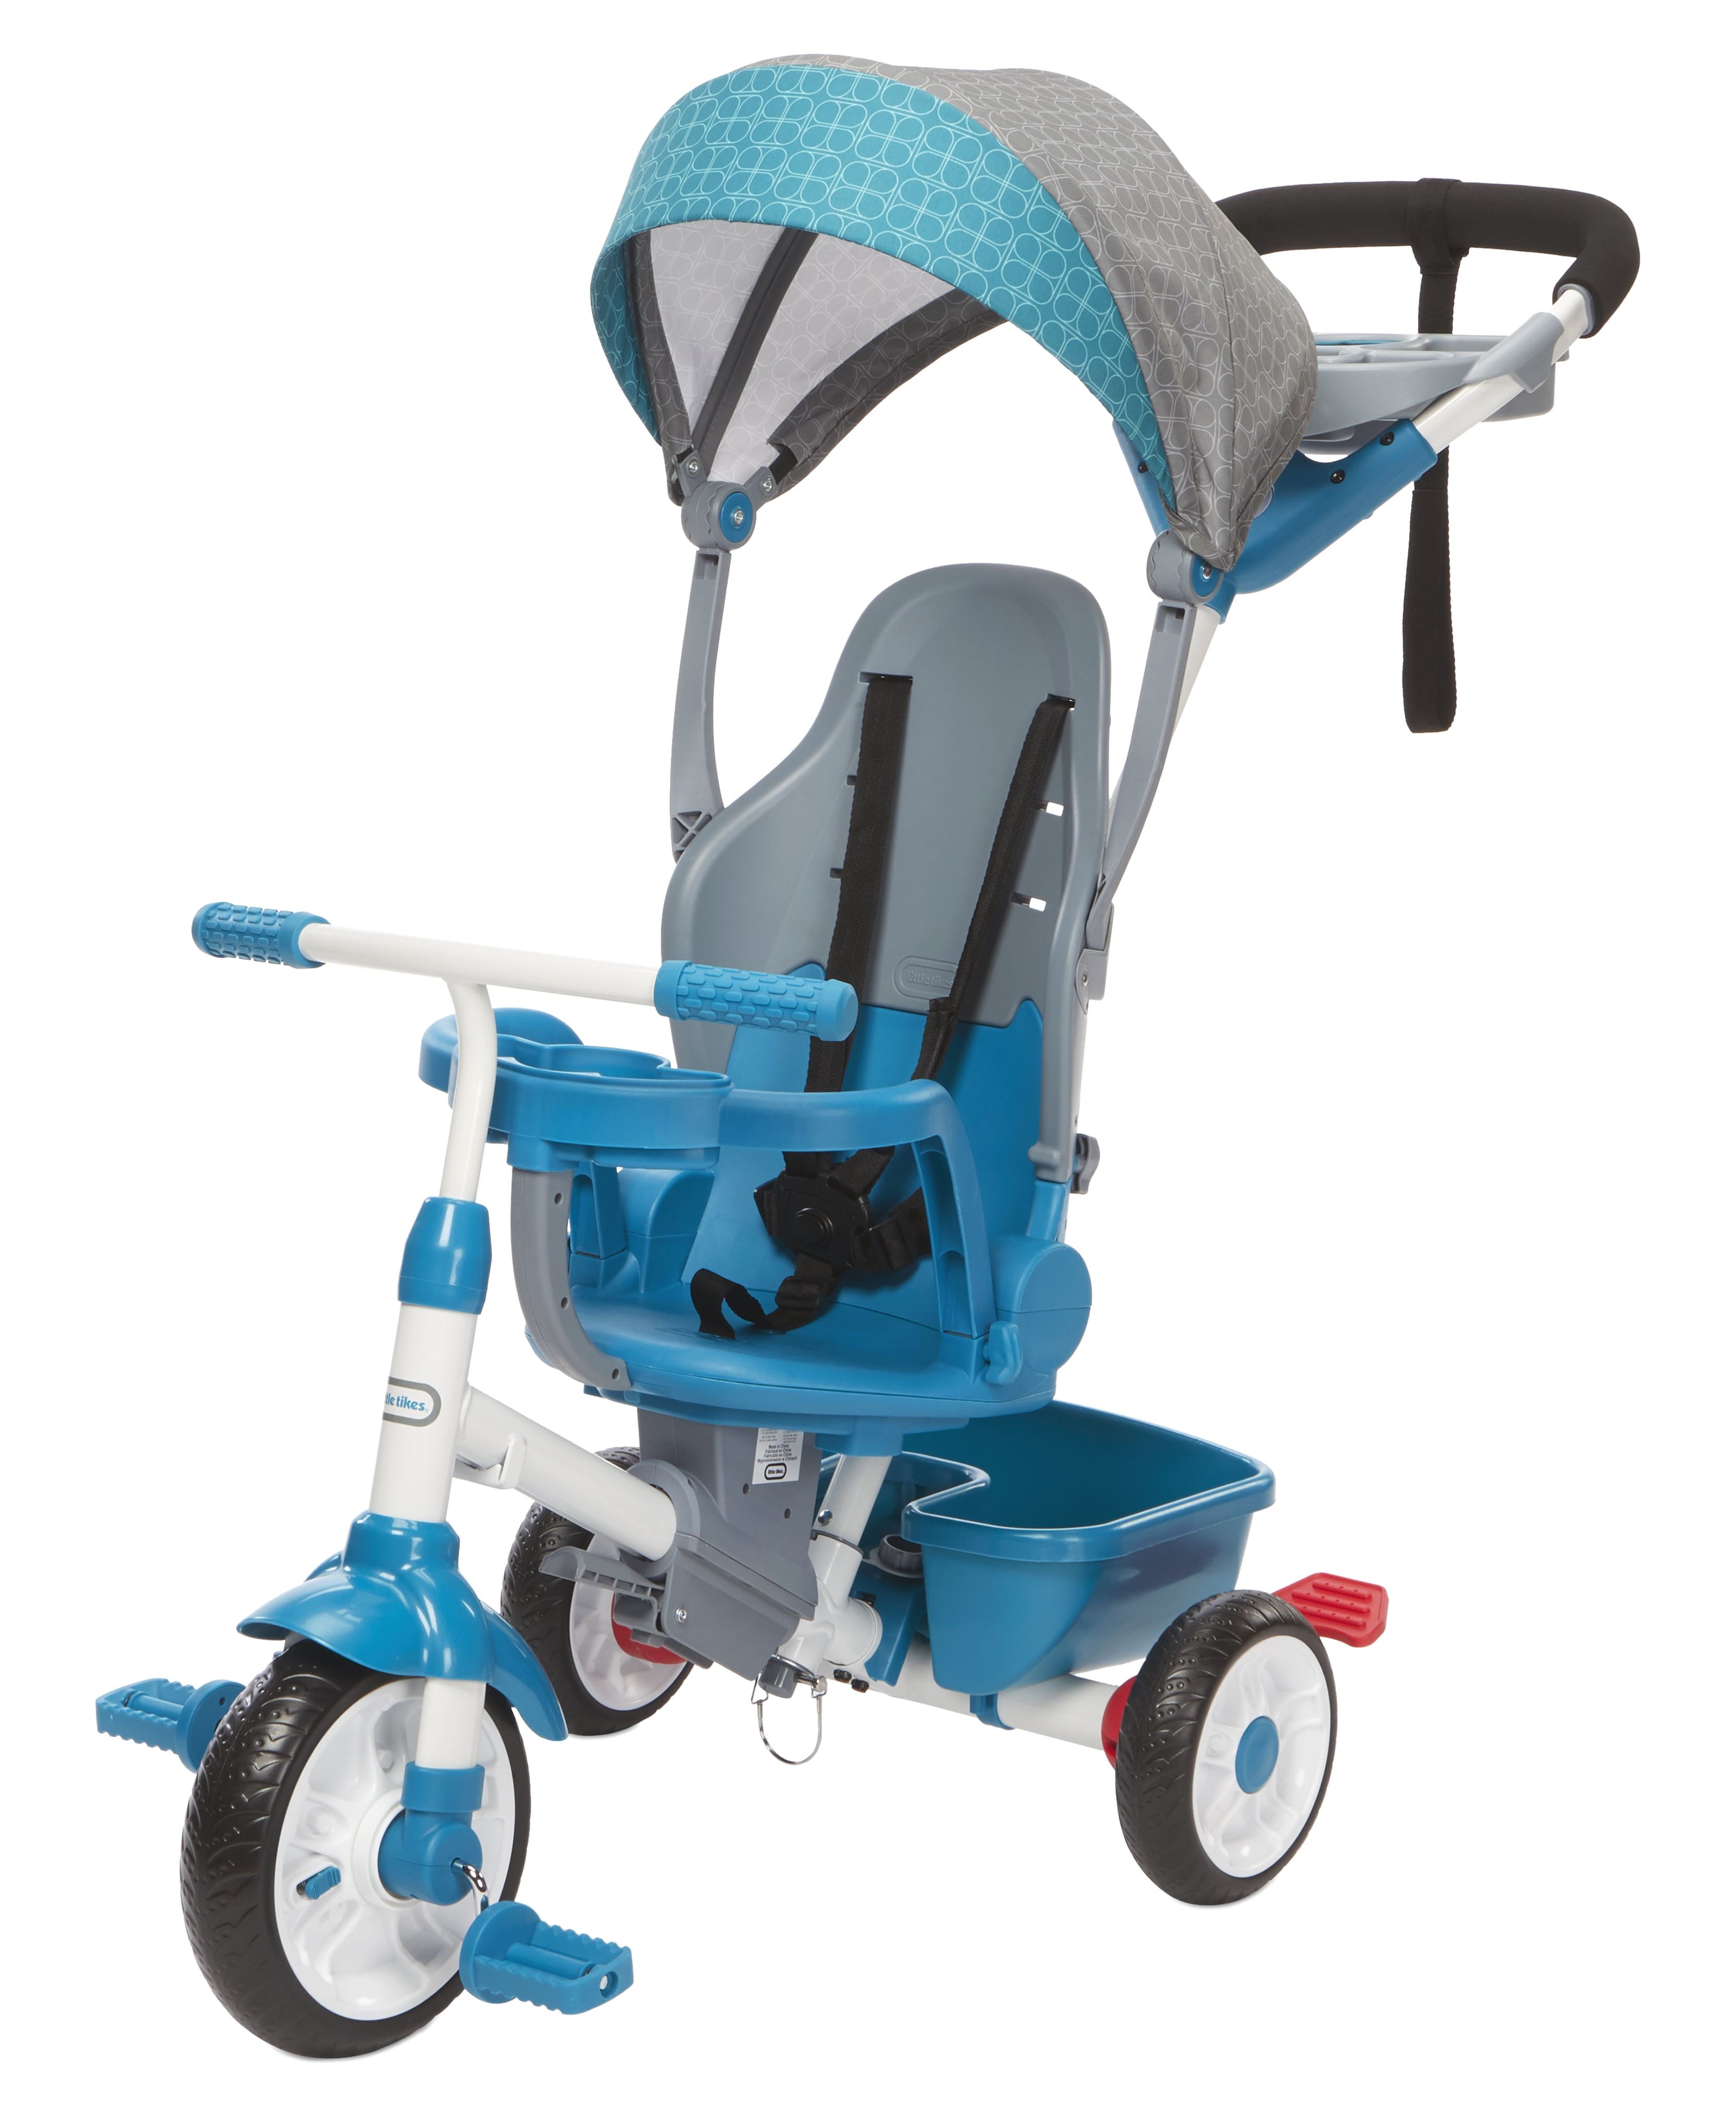 Little Tikes Perfect Fit 4-in-1 Trike in Teal, Convertible Tricycle for Toddlers, 4 Stages of Growth & Shade Canopy - Kids Boys Girls Ages 9 Months to 3 Years Old - image 1 of 13